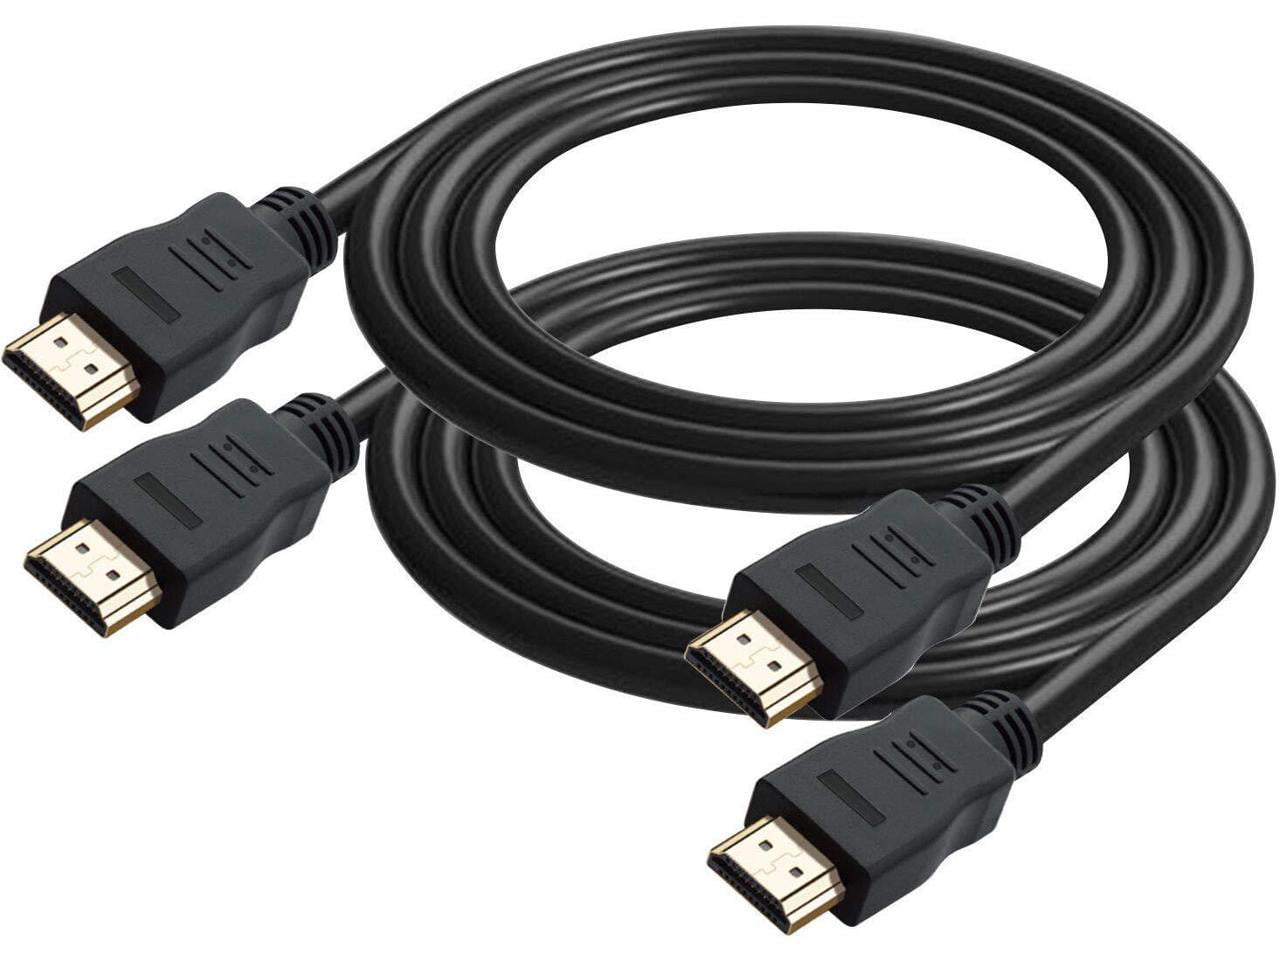 30FT, Black HDMI Cable 4K HDMI 2.0 Ready High Speed with Ethernet Support 10.2Gbps Cmple